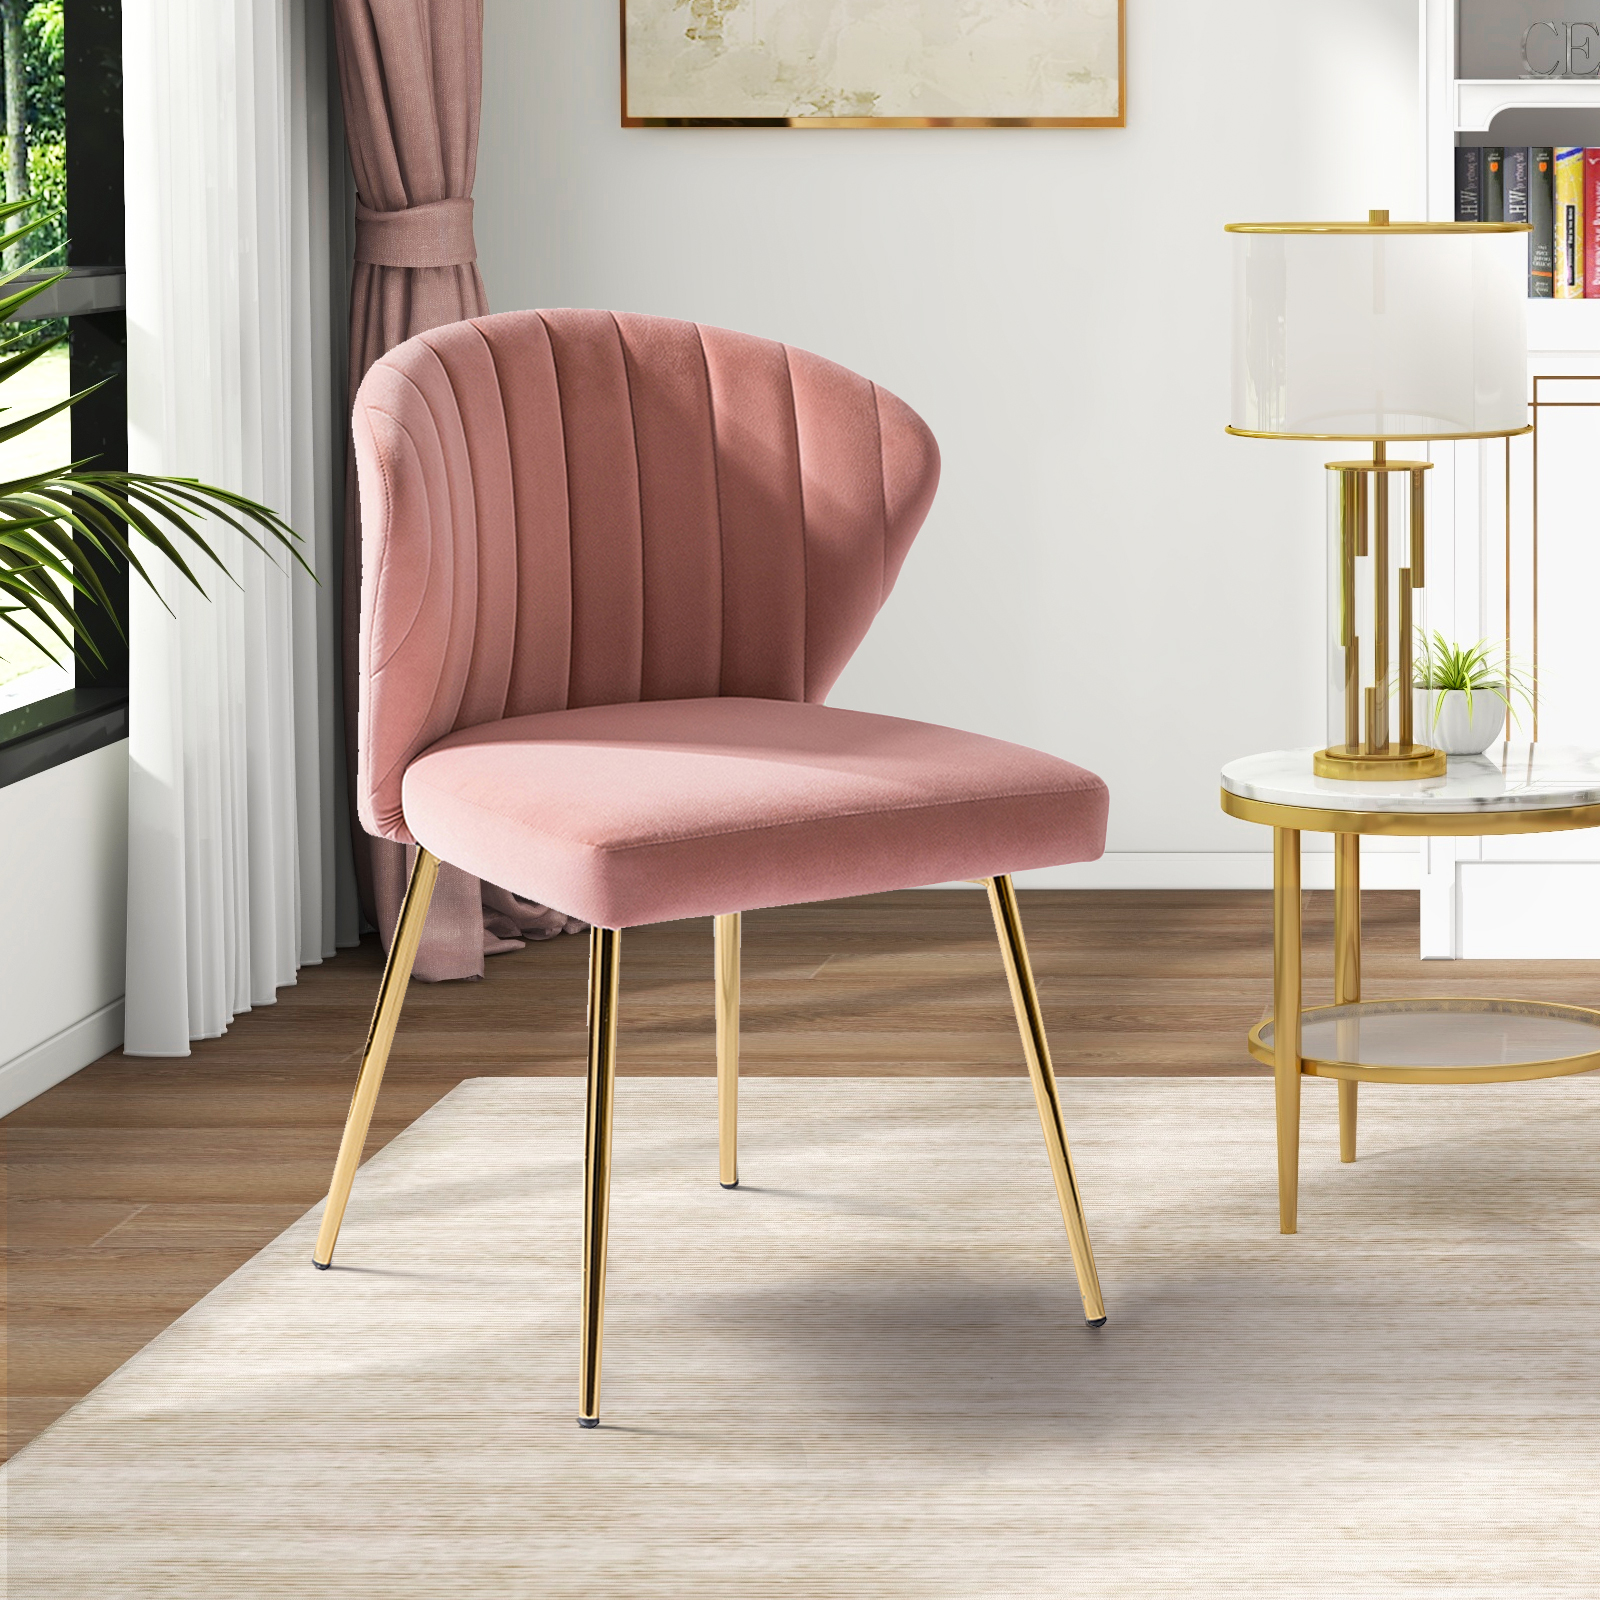 Velvet Wingback Accent Chair Upholstered Home Kitchen Dining Chair Tufted Gold Metal Legs Living Bedroom Pink - image 1 of 10